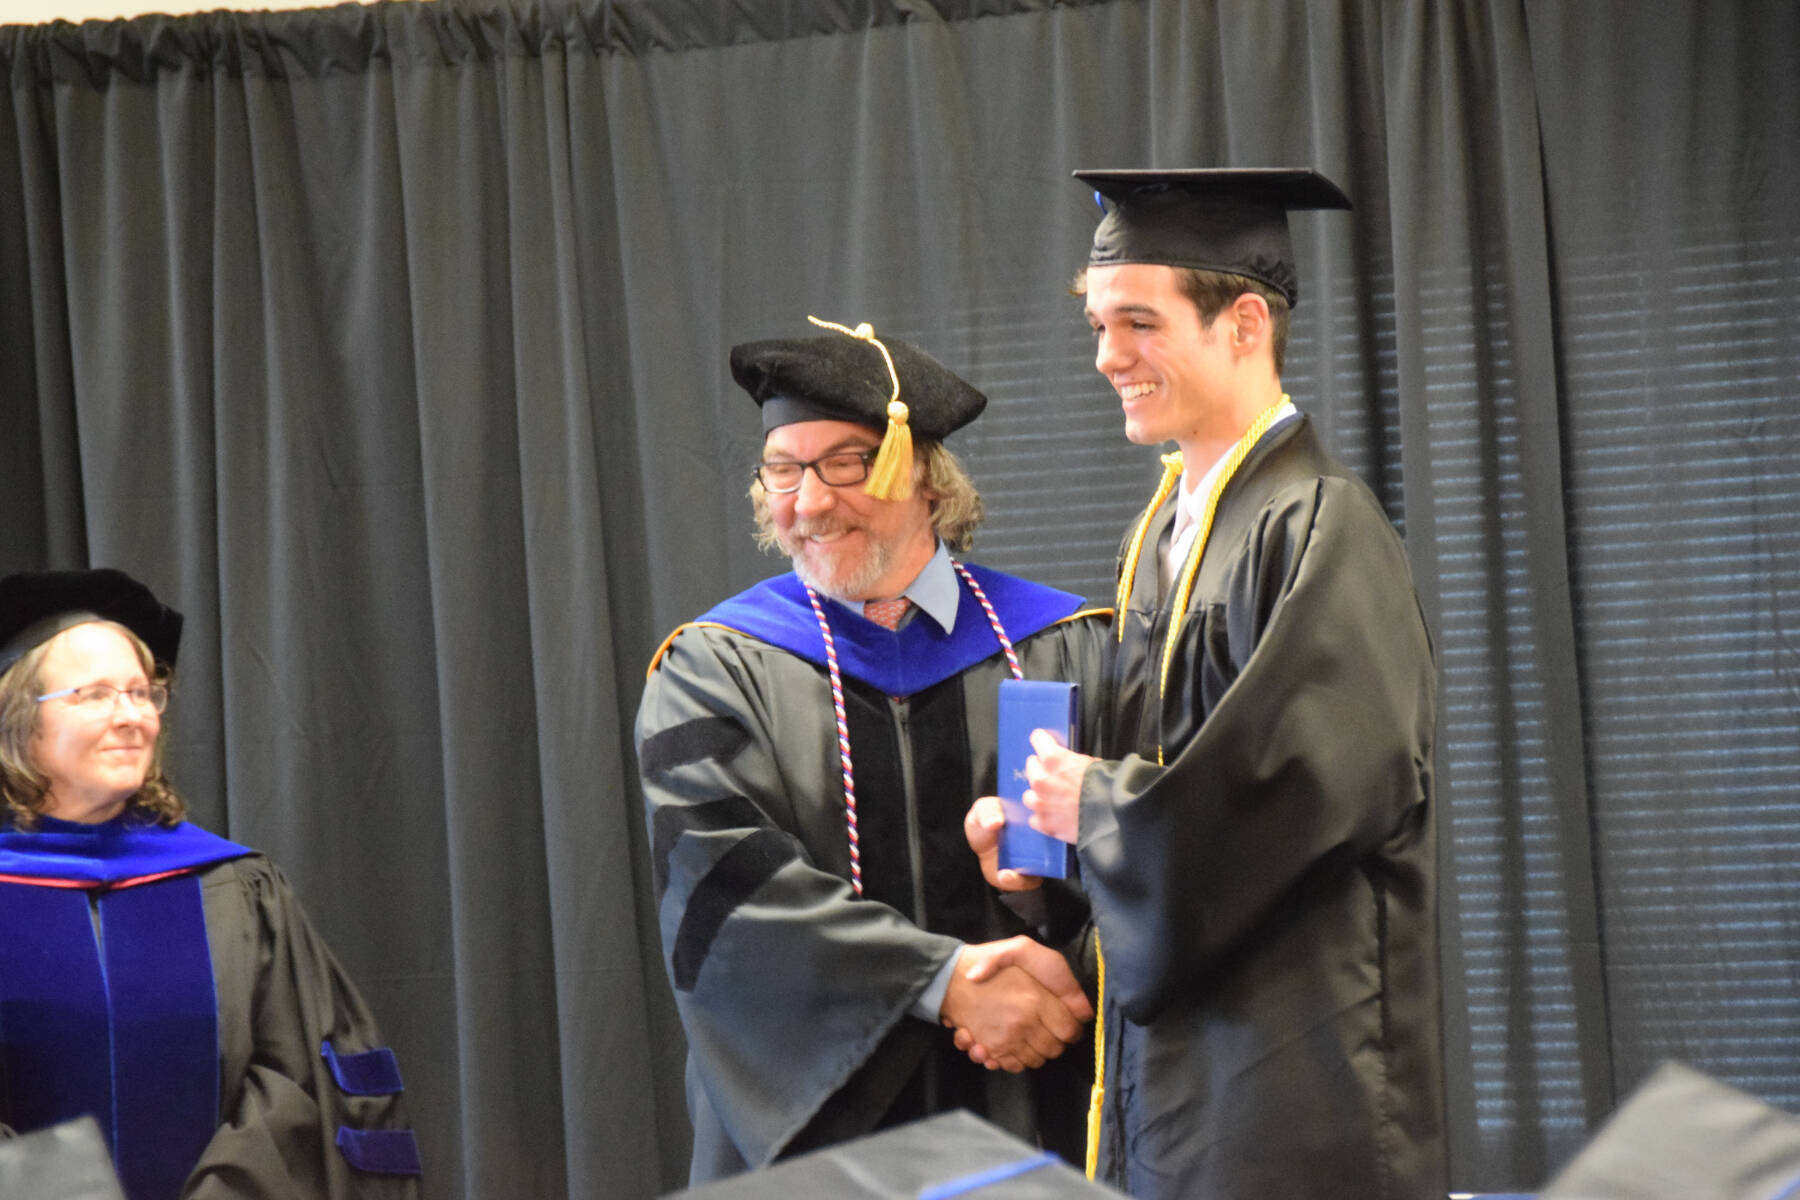 Kachemak Bay Campus director Dr. Reid Brewer (center) presents Jonathan Rozeboom (right) with his Associate of Arts diploma during the 2023 KBC Commencement on Wednesday, May 10, 2023 in Homer, Alaska. (Photo by Delcenia Cosman/Homer News)